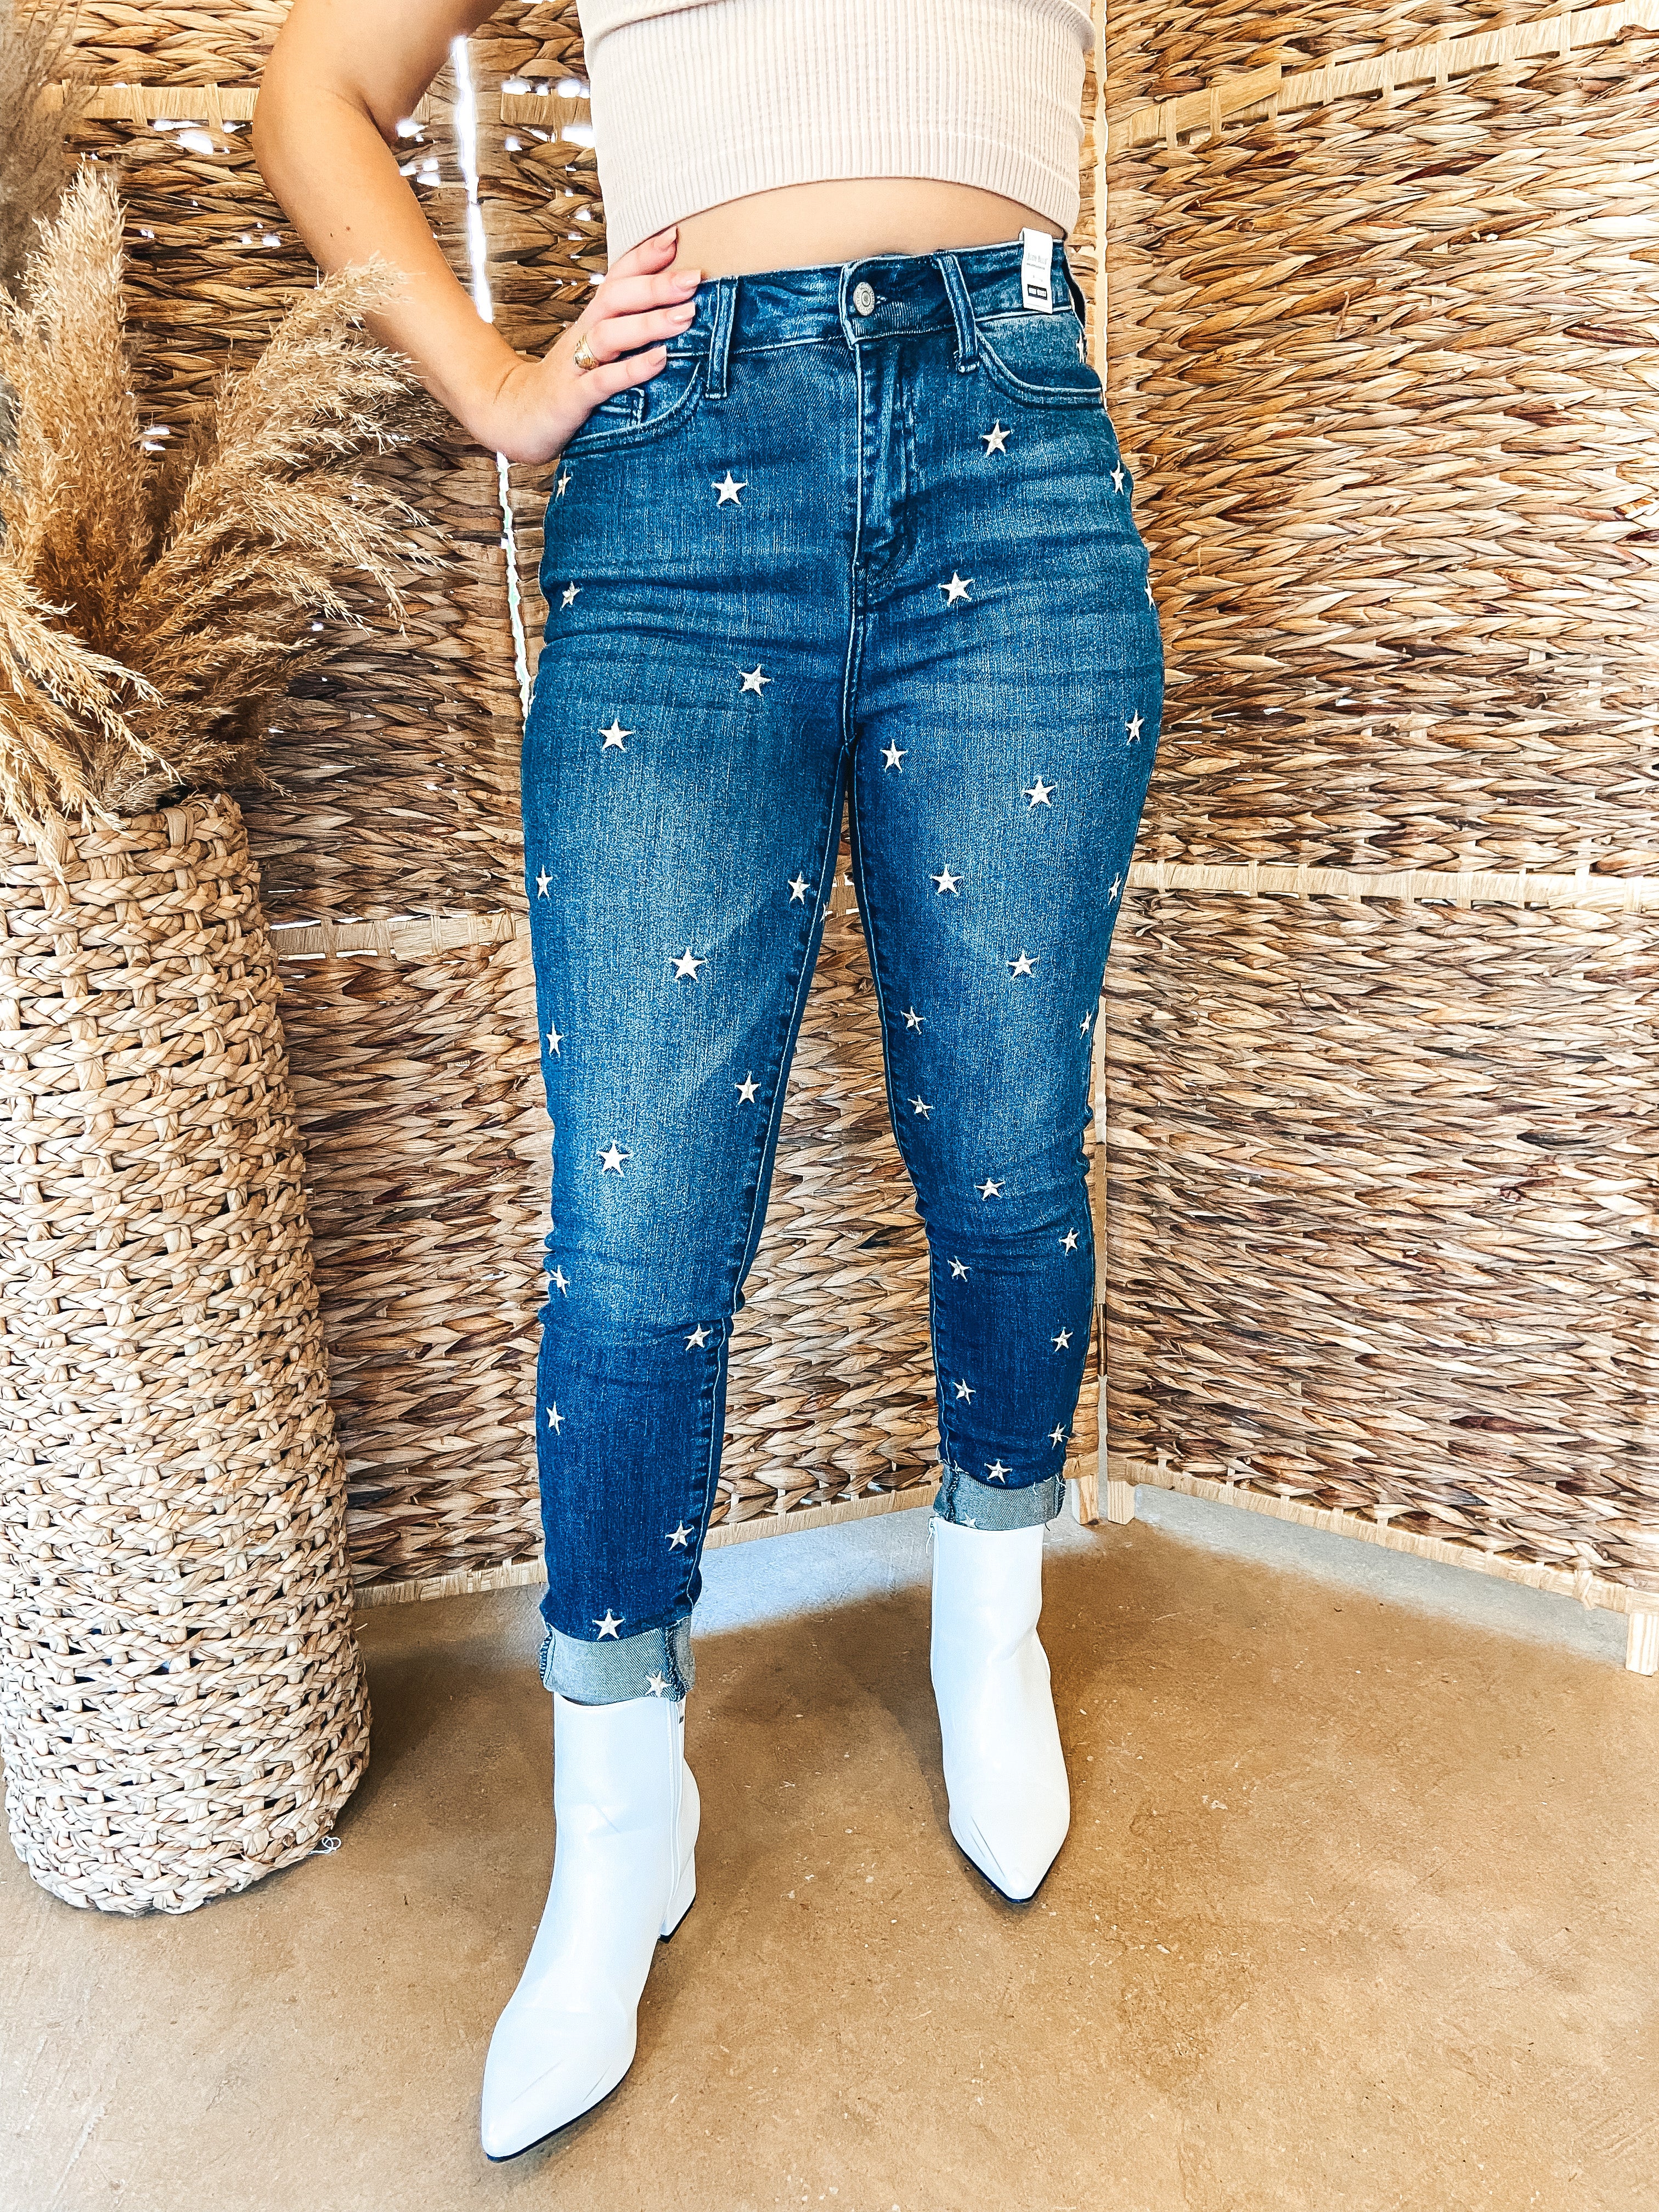 Last Chance Size 1 | Judy Blue | Star Romance Embroidered Skinny Jeans in Dark Wash - Giddy Up Glamour Boutique